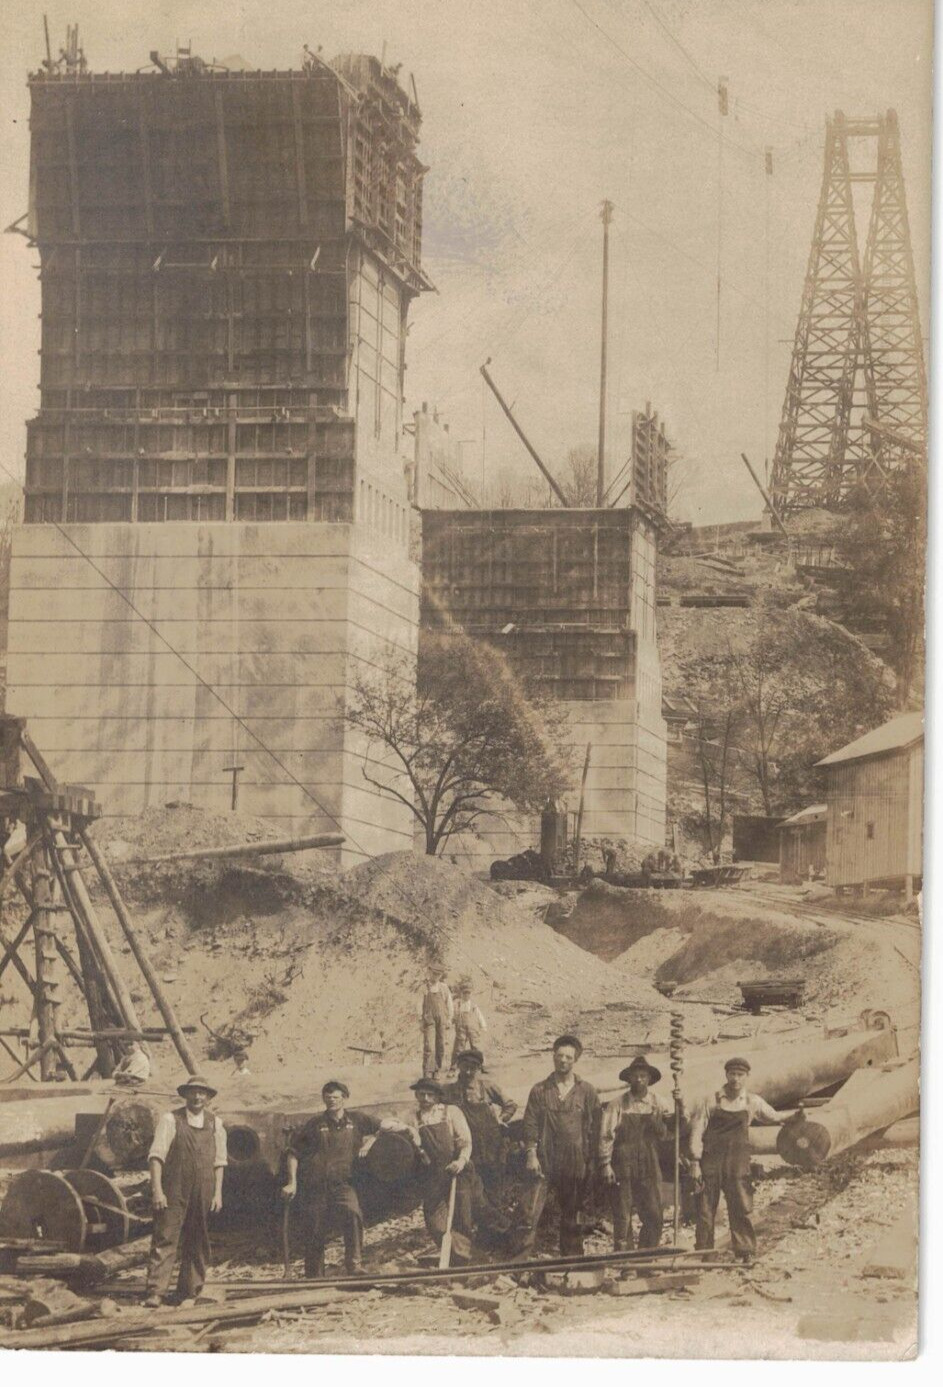 C.1910 RPPC Construction Workers Factory Children Kids Tracks Tower Electricity